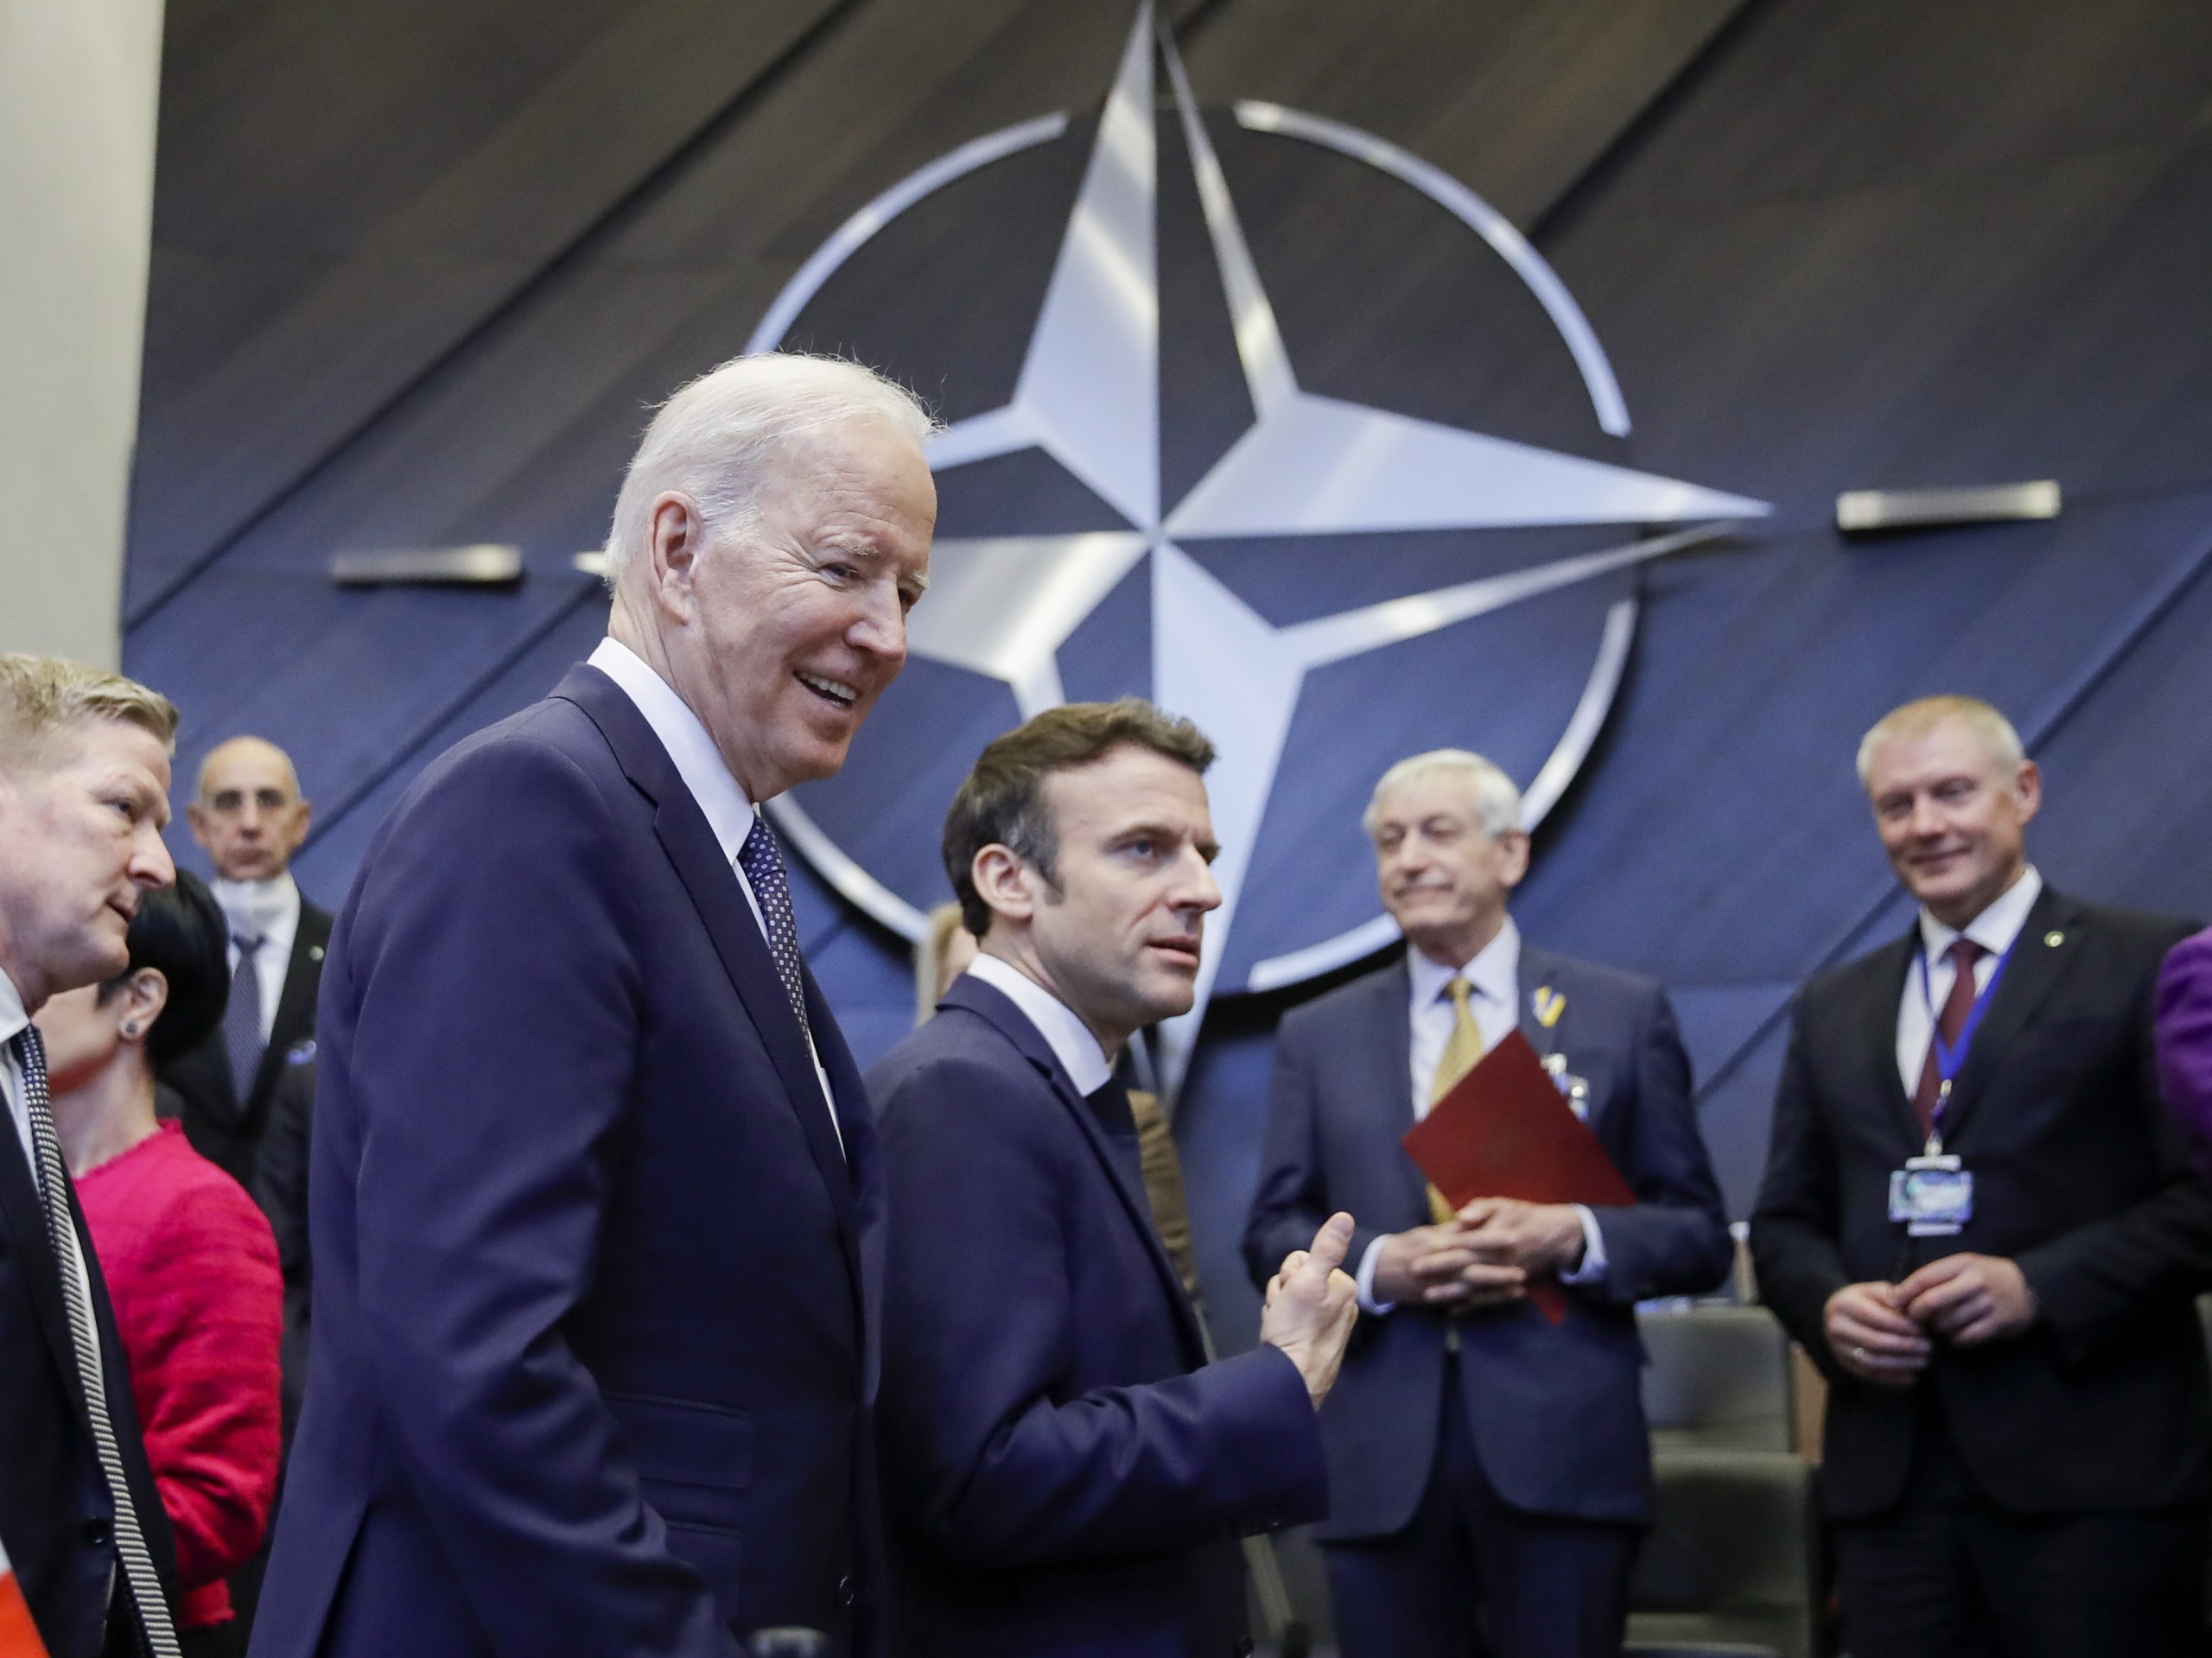 epa09845840 US President Joe Biden (L) and French President Emmanuel Macron (C) arrive for a round table meeting during an extraordinary NATO Summit at the Alliance's headquarters in Brussels, Belgium, 24 March 2022. NATO leaders will address the consequences of Russian President Putin's invasion of Ukraine, discuss the role of China in this crisis, and decide on the next steps to strengthen NATO's deterrence and defence.  EPA/OLIVIER HOSLET